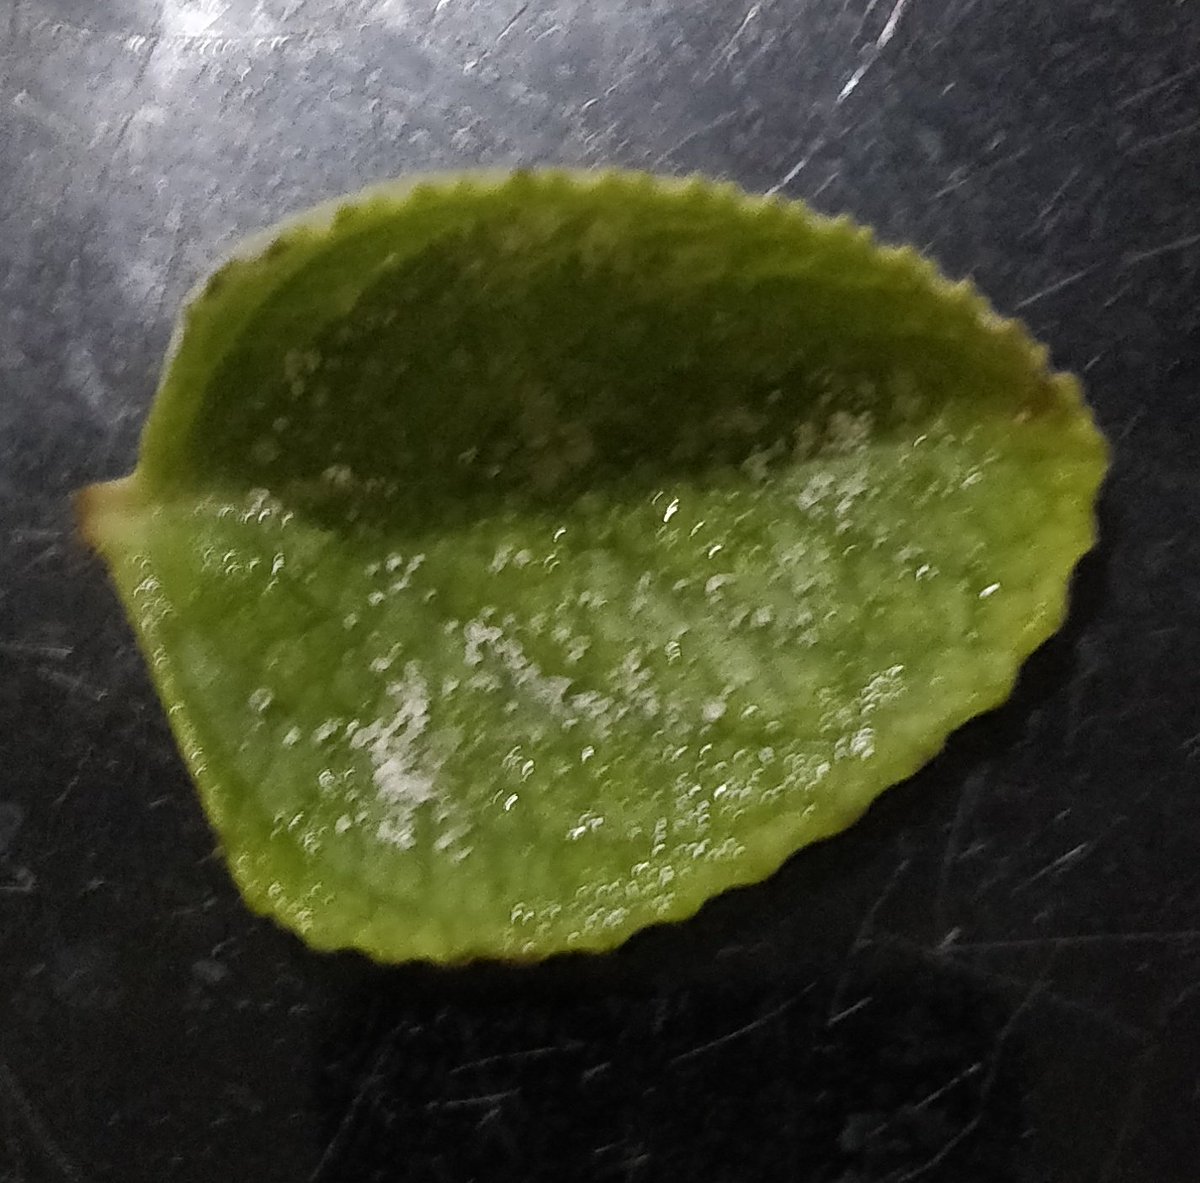 Try savouring this Doddapatre sprinkled with salt. .... Heavenly to taste. In addition it removes bad odour in mouth, fights phlegm, cough & cold, improves digestion.